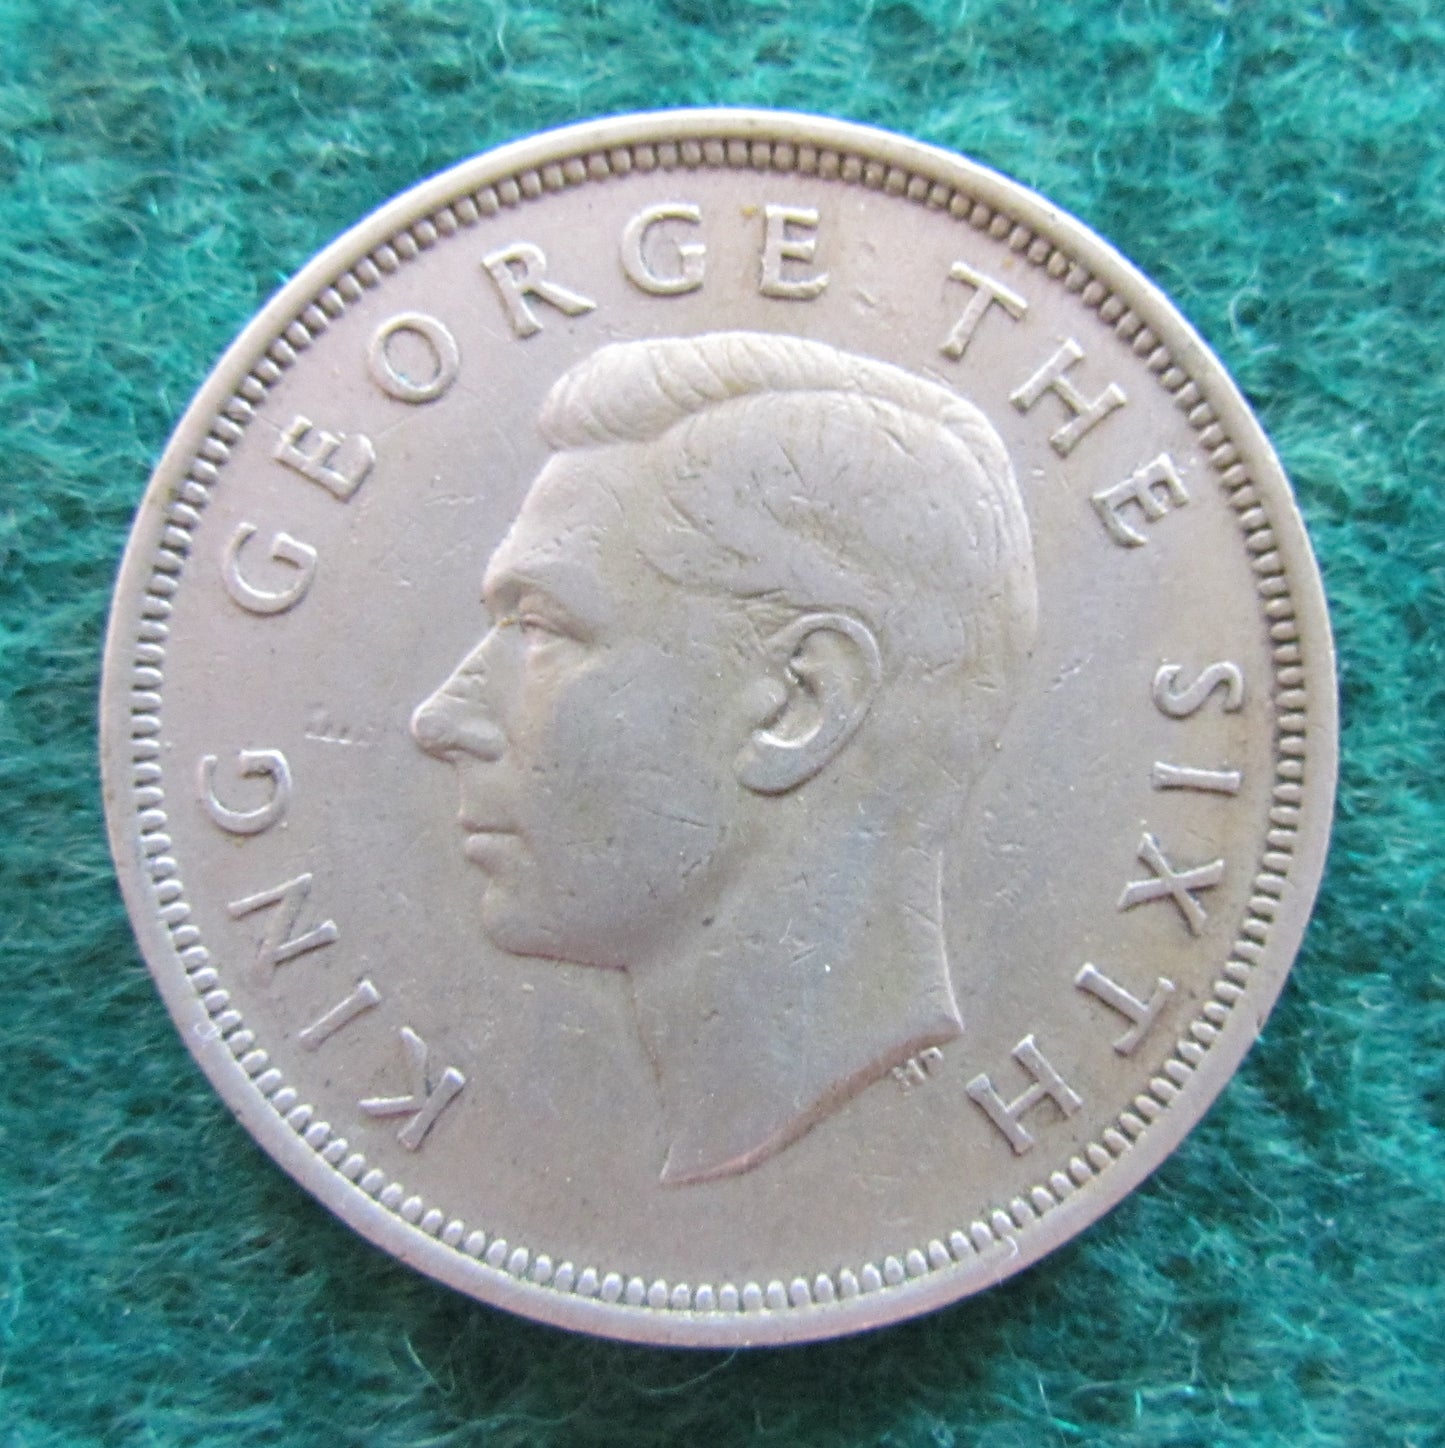 New Zealand 1950 Half Crown King George VI Coin - Circulated